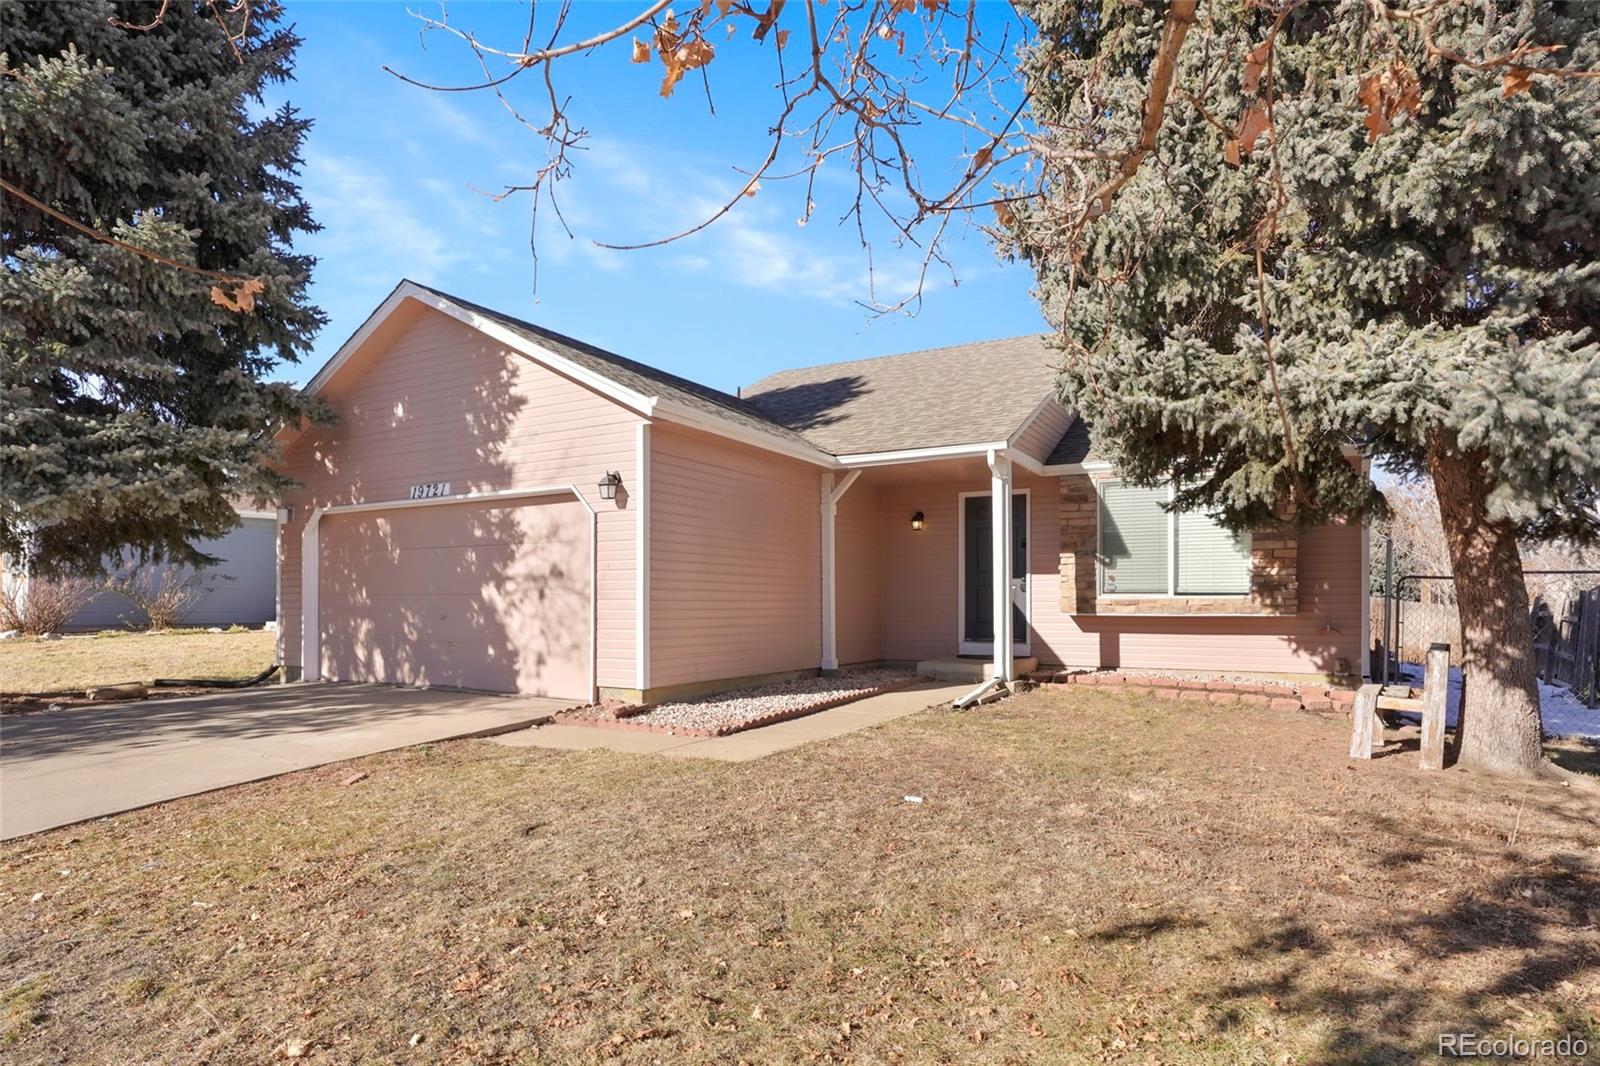 19721 e bails place, aurora sold home. Closed on 2024-02-15 for $430,000.